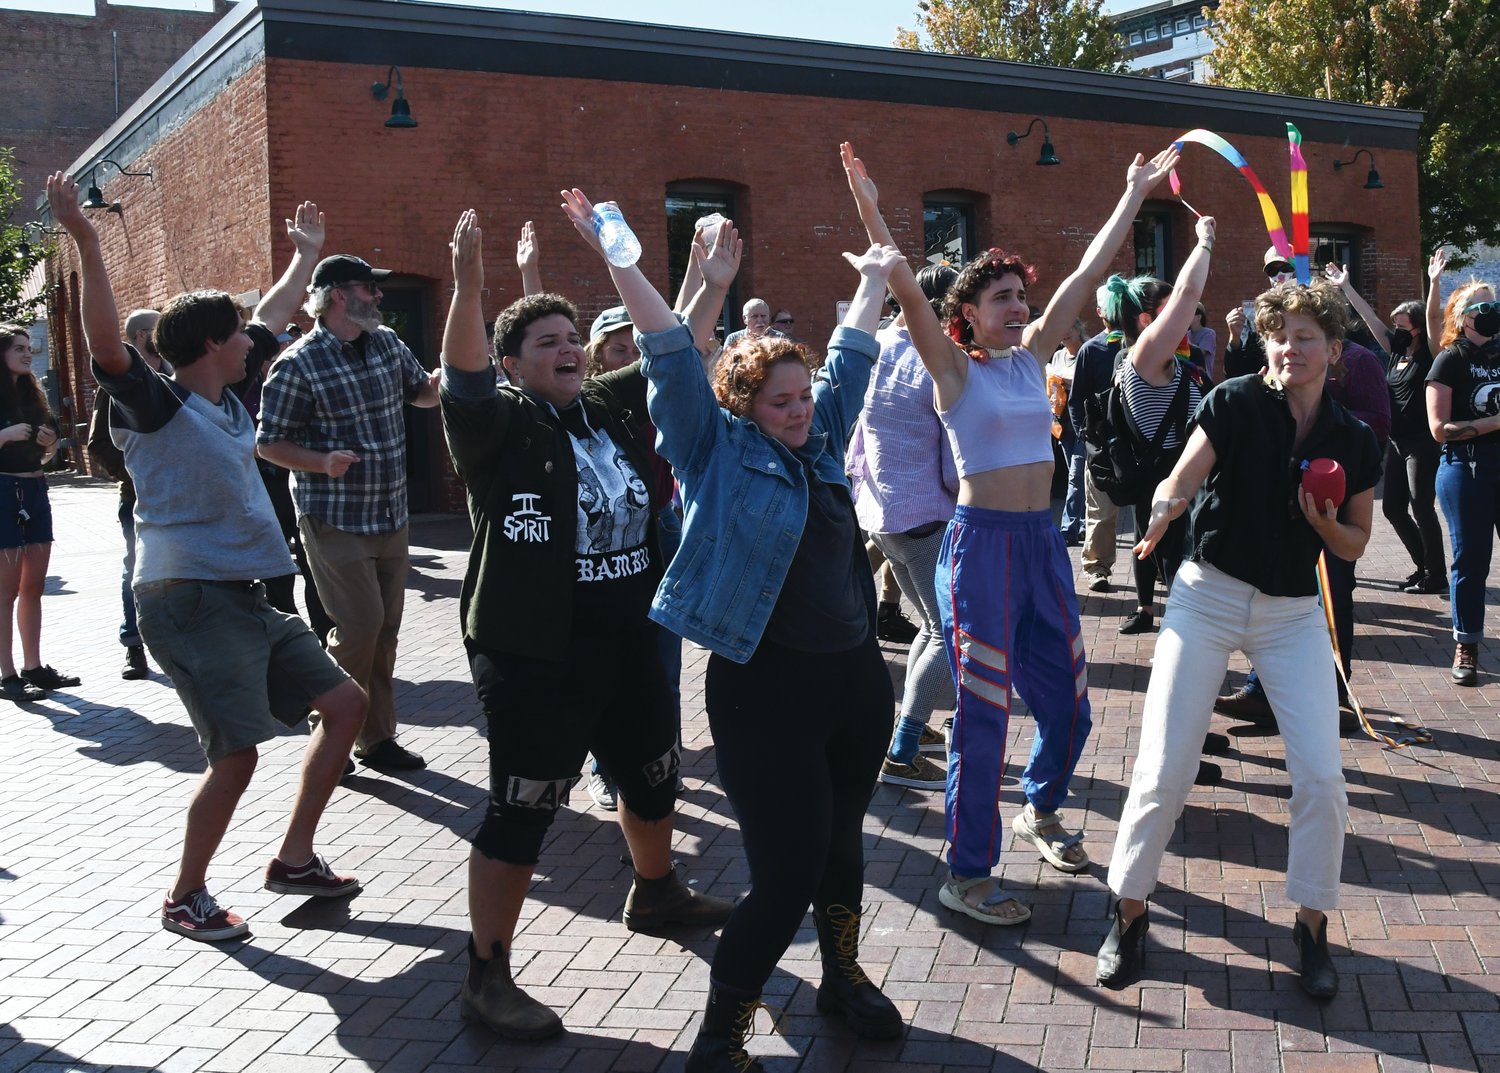 Counter protesters dance and sing to “Y.M.C.A” by Village People to show solidarity for the Olympic Peninsula YMCA.